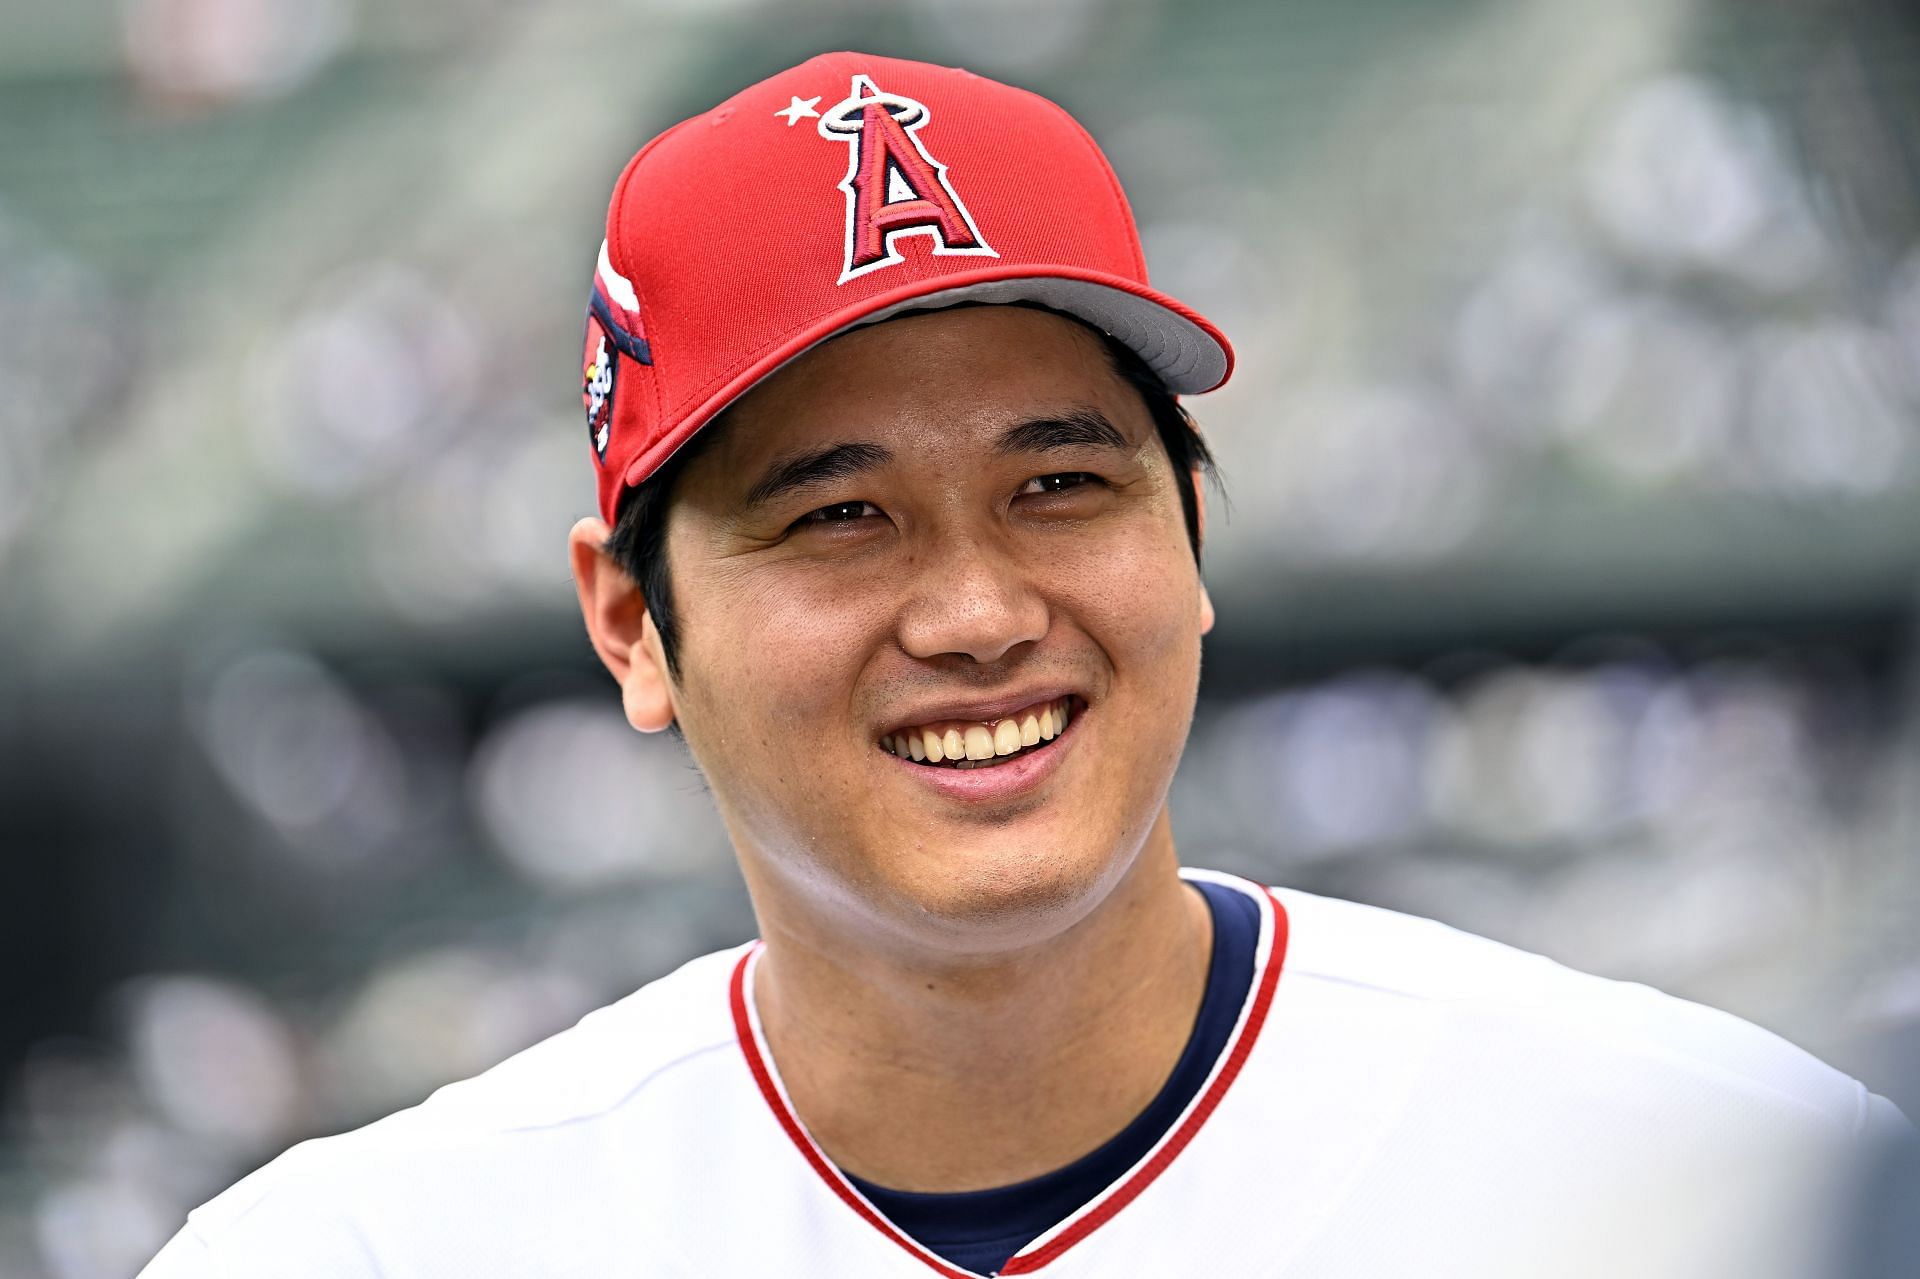 All eyes are on Shohei Ohtani